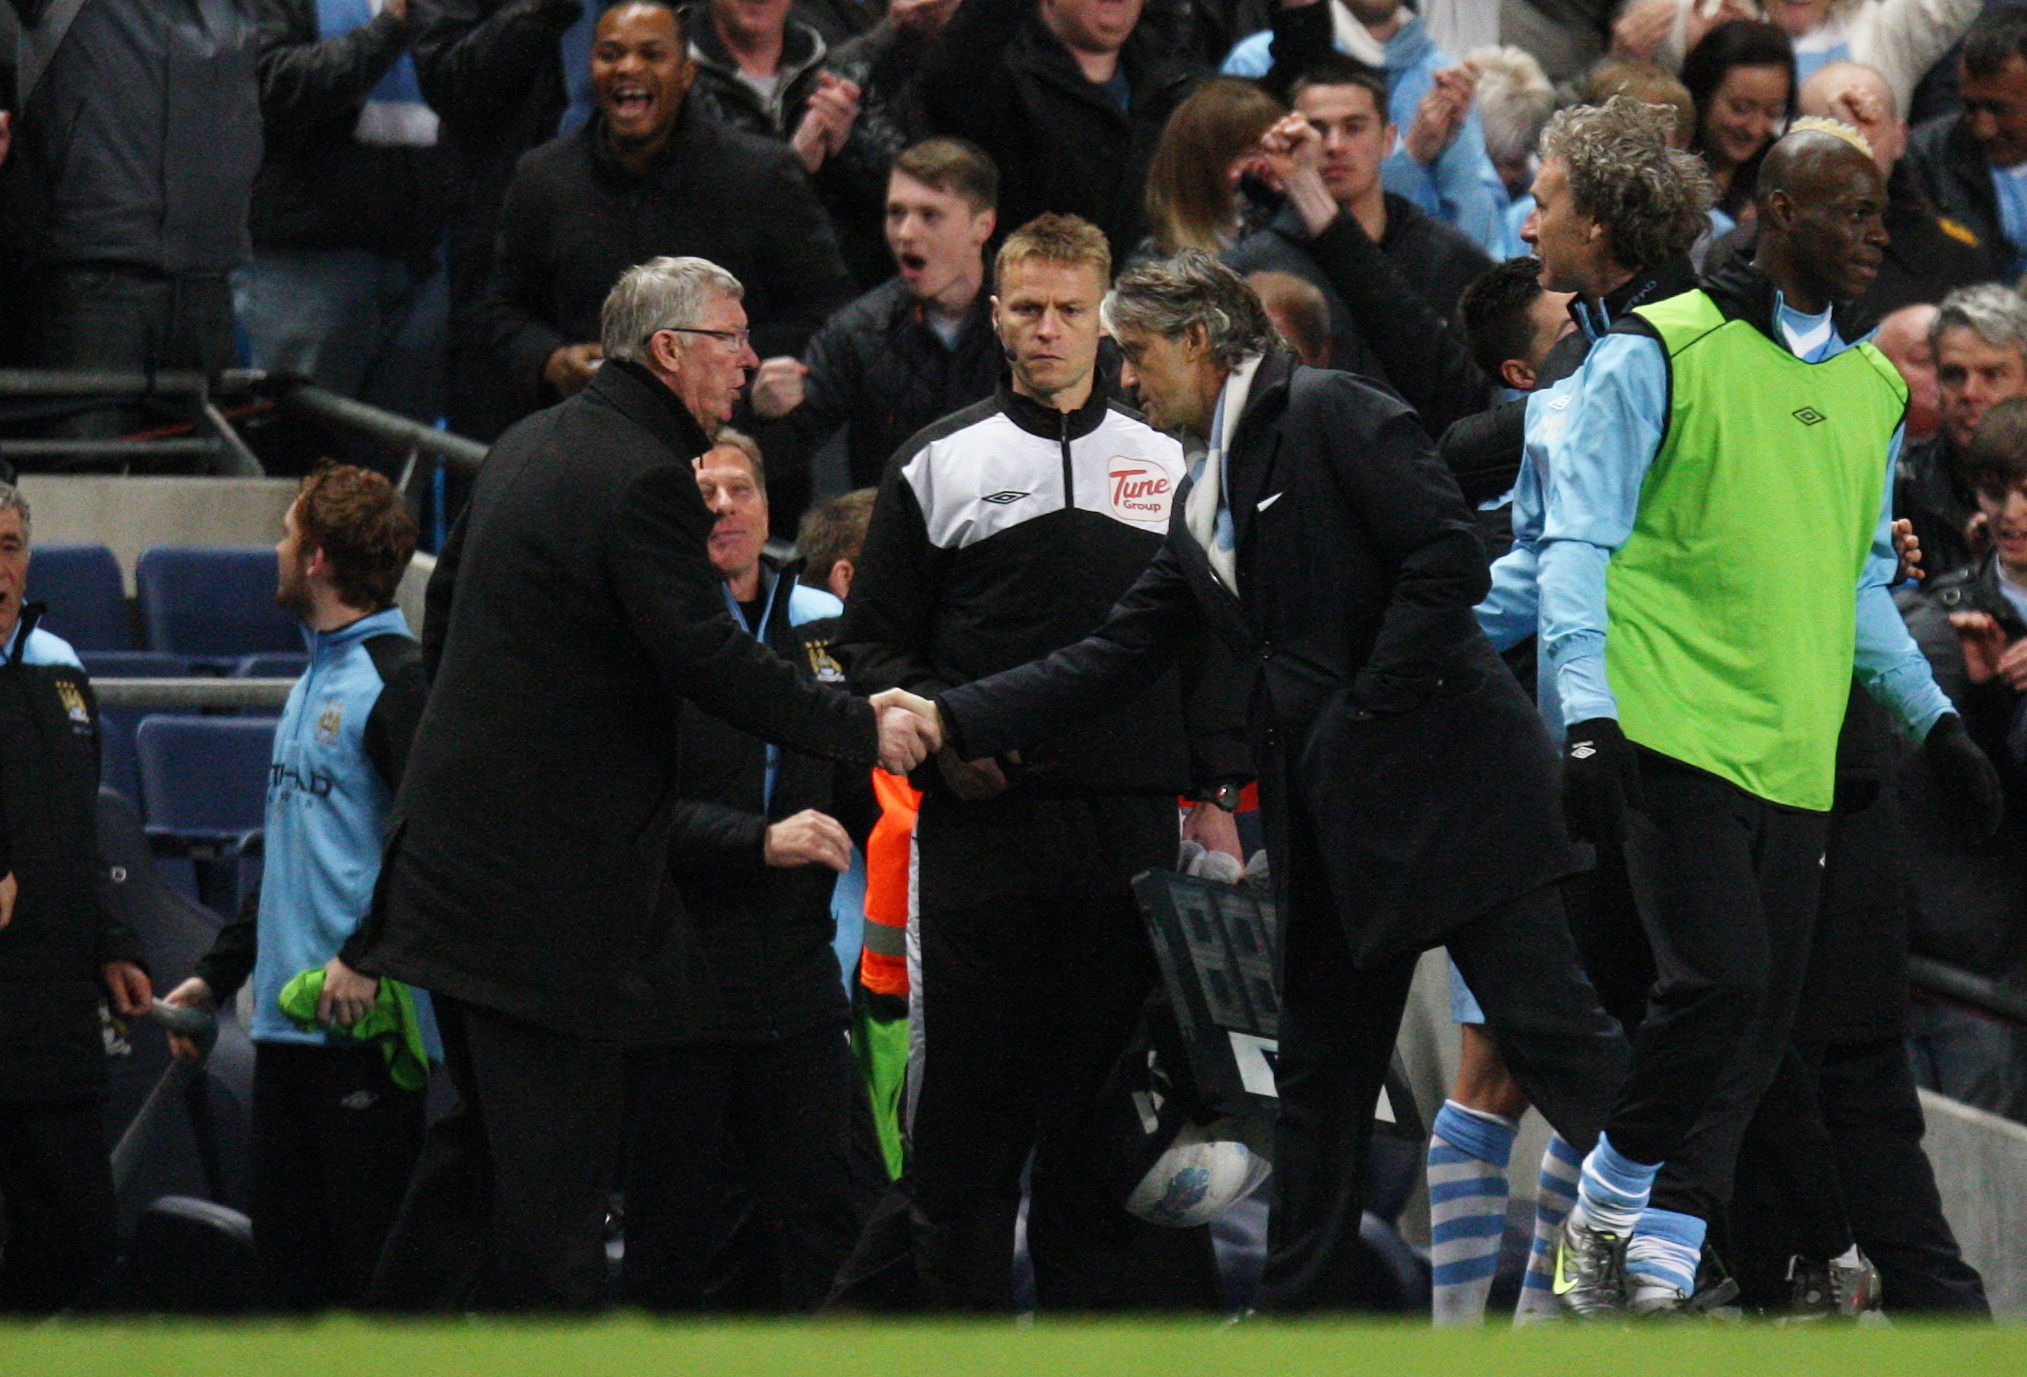 Football - Manchester City v Manchester United Barclays Premier League  - Etihad Stadium - 30/4/12 
Manchester City manager Roberto Mancini (R) and Manchester United manager Sir Alex Ferguson shake hands after the match 
Mandatory Credit: Action Images / Carl Recine 
Livepic 
EDITORIAL USE ONLY. No use with unauthorized audio, video, data, fixture lists, club/league logos or live services. Online in-match use limited to 45 images, no video emulation. No use in betting, games or single club/leagu